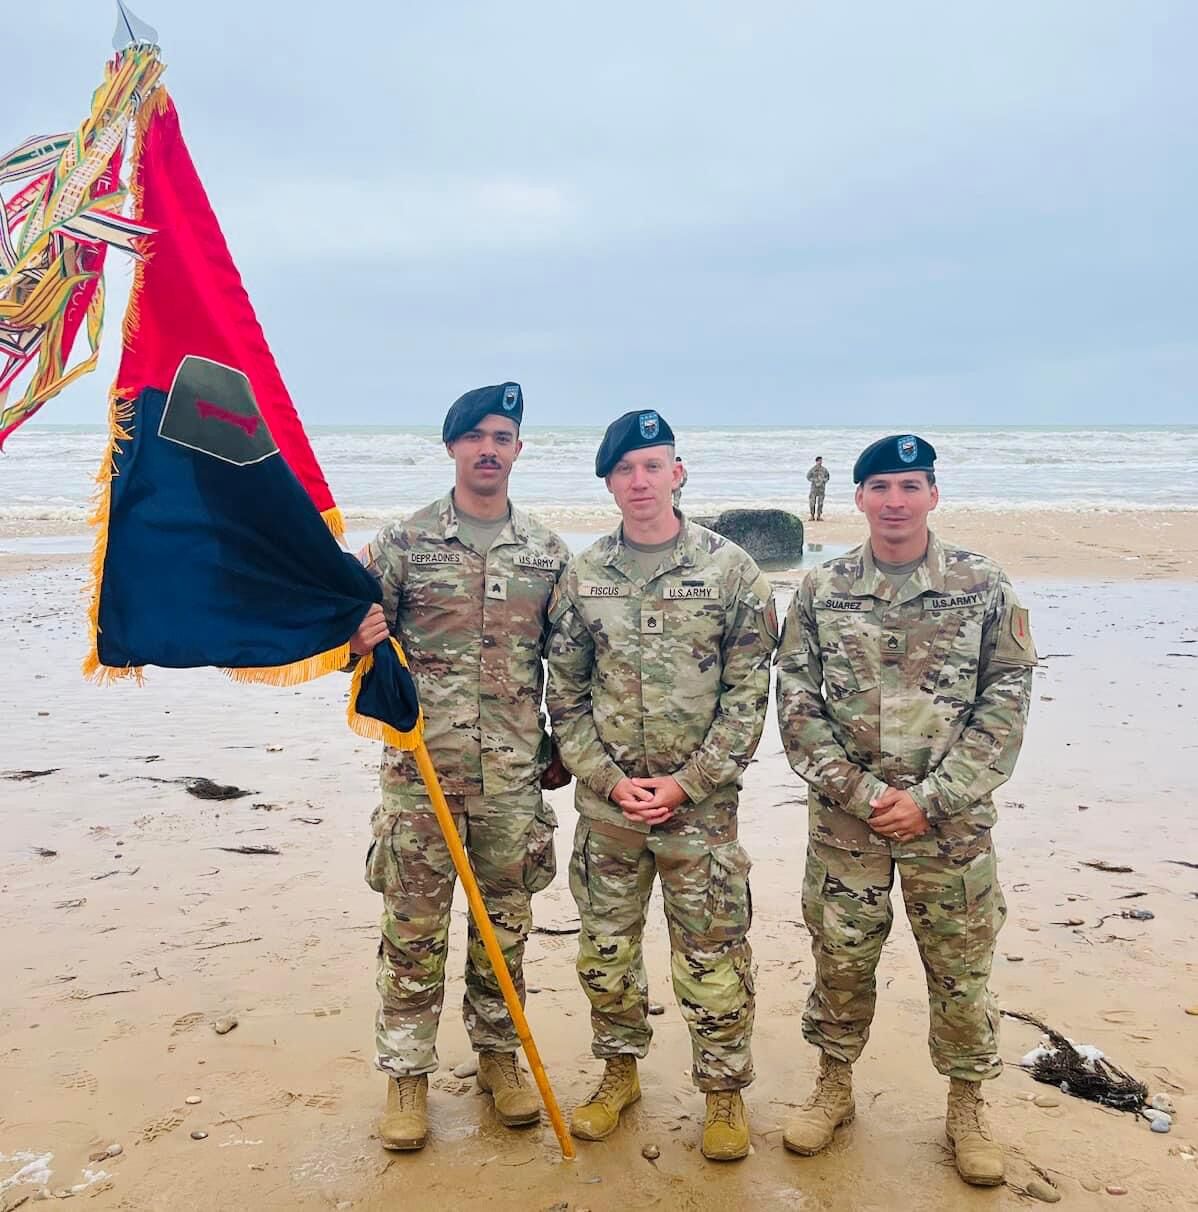 U.S. Army Sgt. De Pradines holding a flag, next to two other soldiers